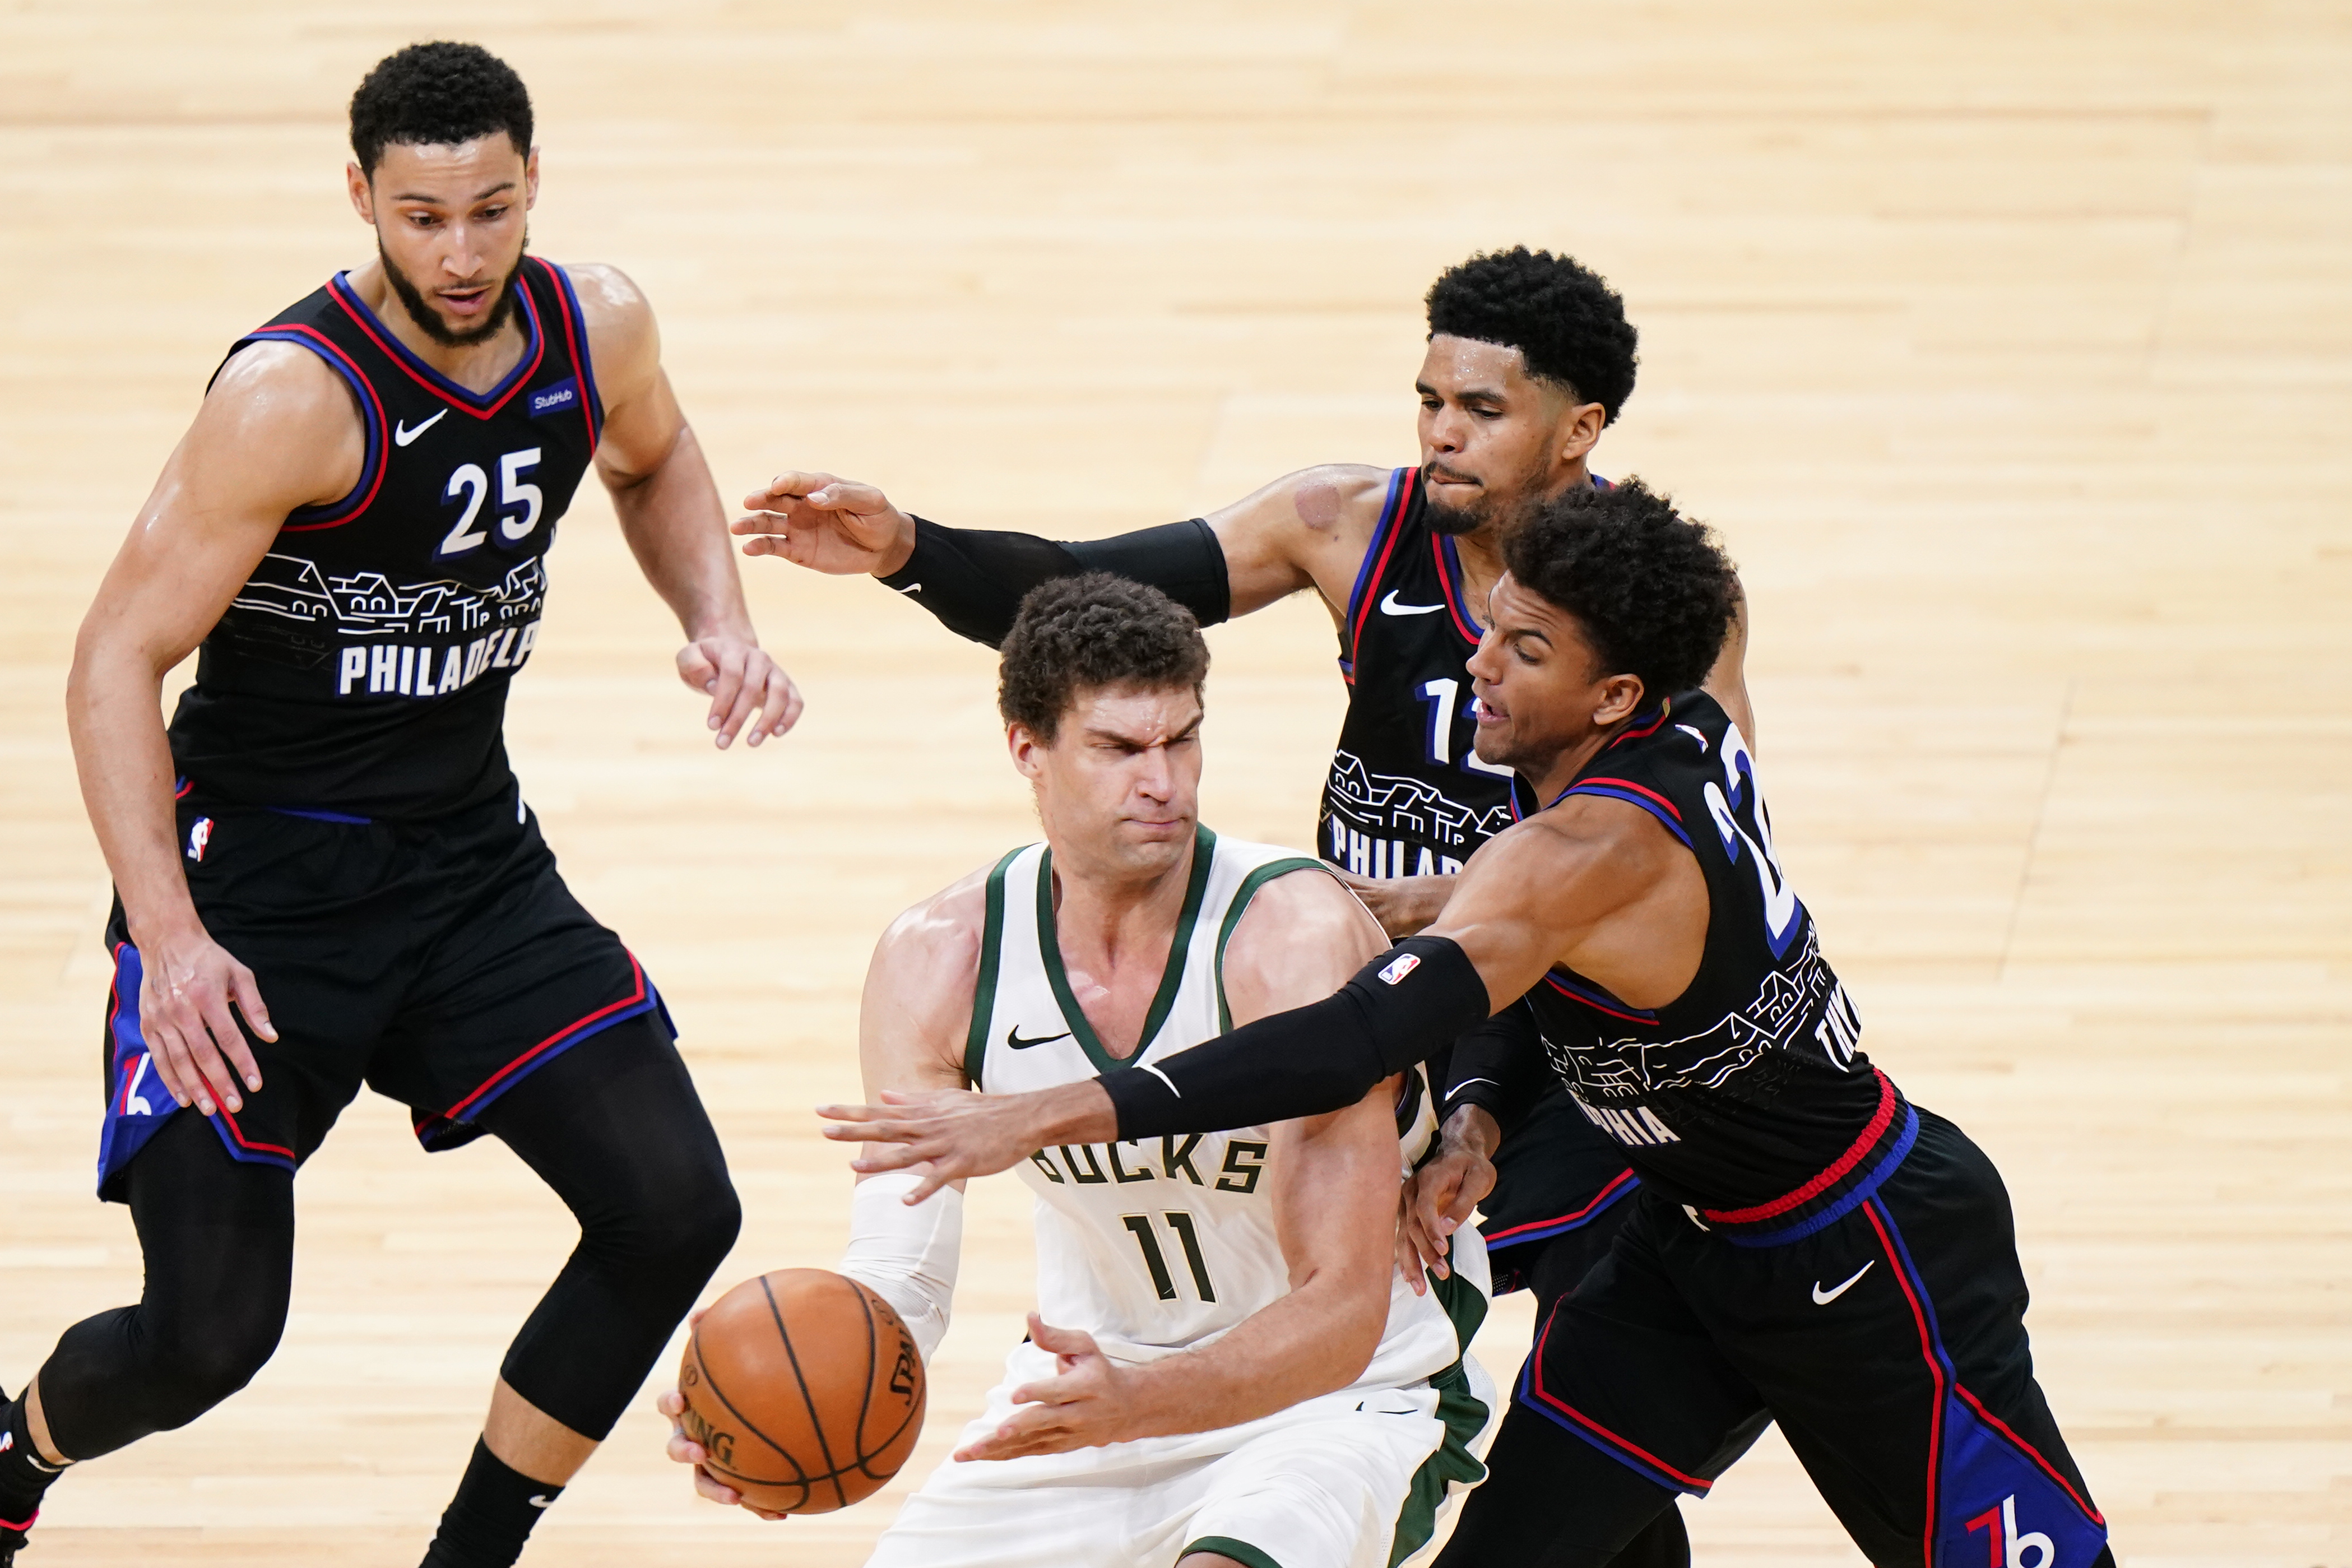 Philadelphia 76ers' Matisse Thybulle earning playing time with defense